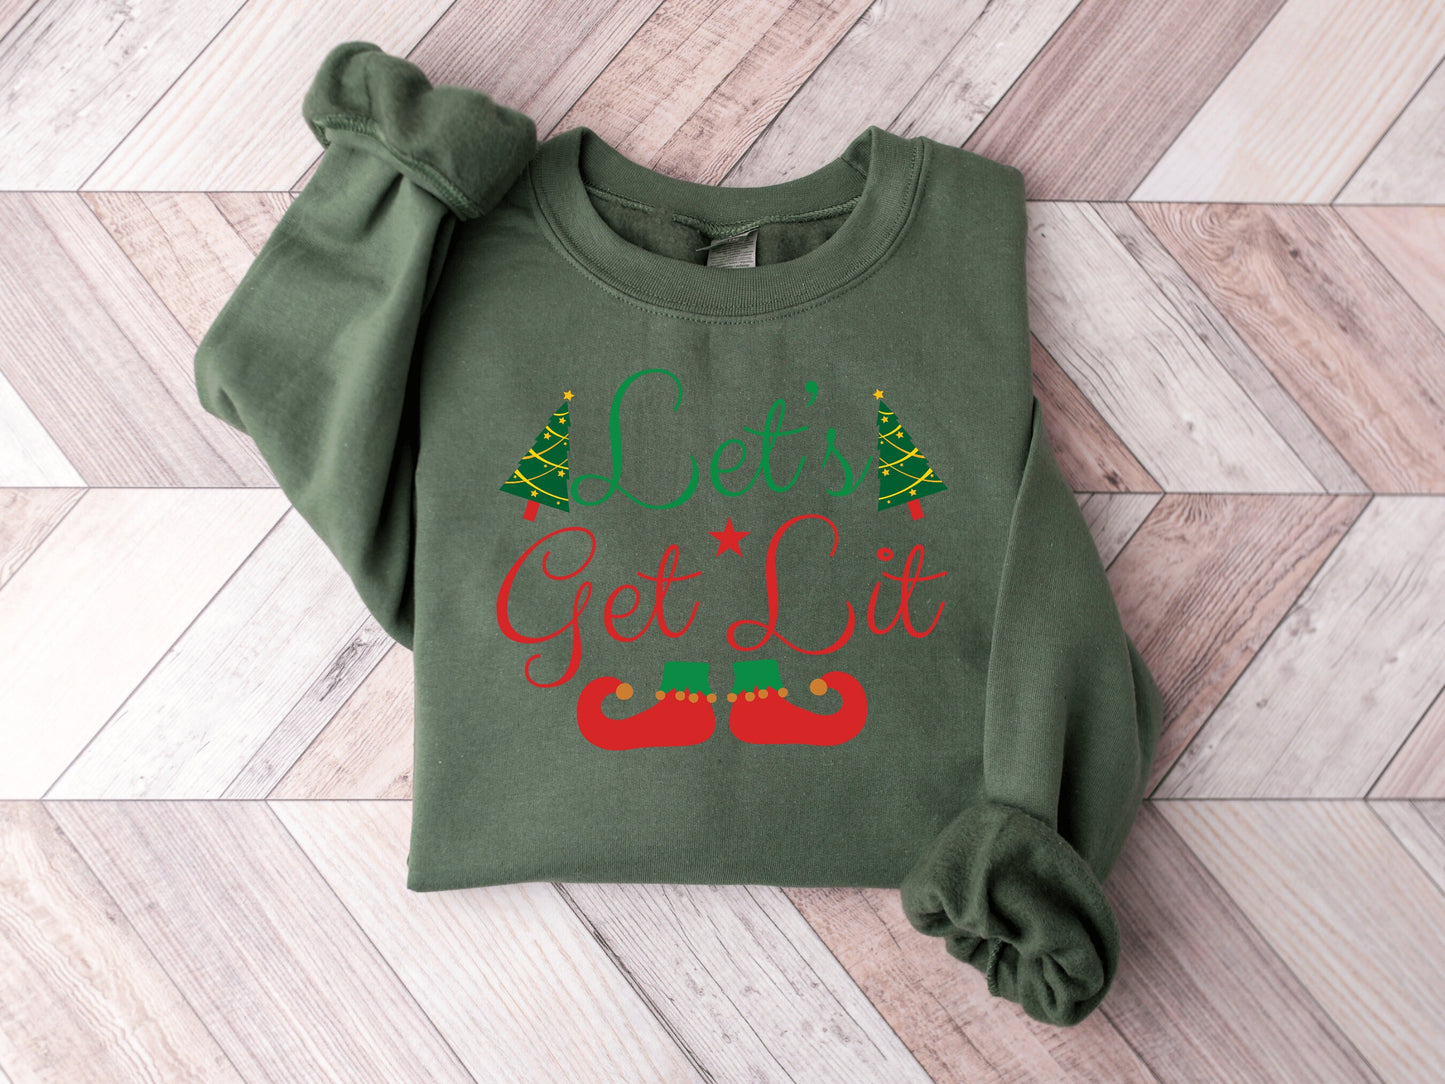 Funny Christmas Sweater, Ugly Christmas Sweater, Funny Christmas Shirt, Women's Christmas Outfit, Holiday Sweater, Christmas Party Shirt